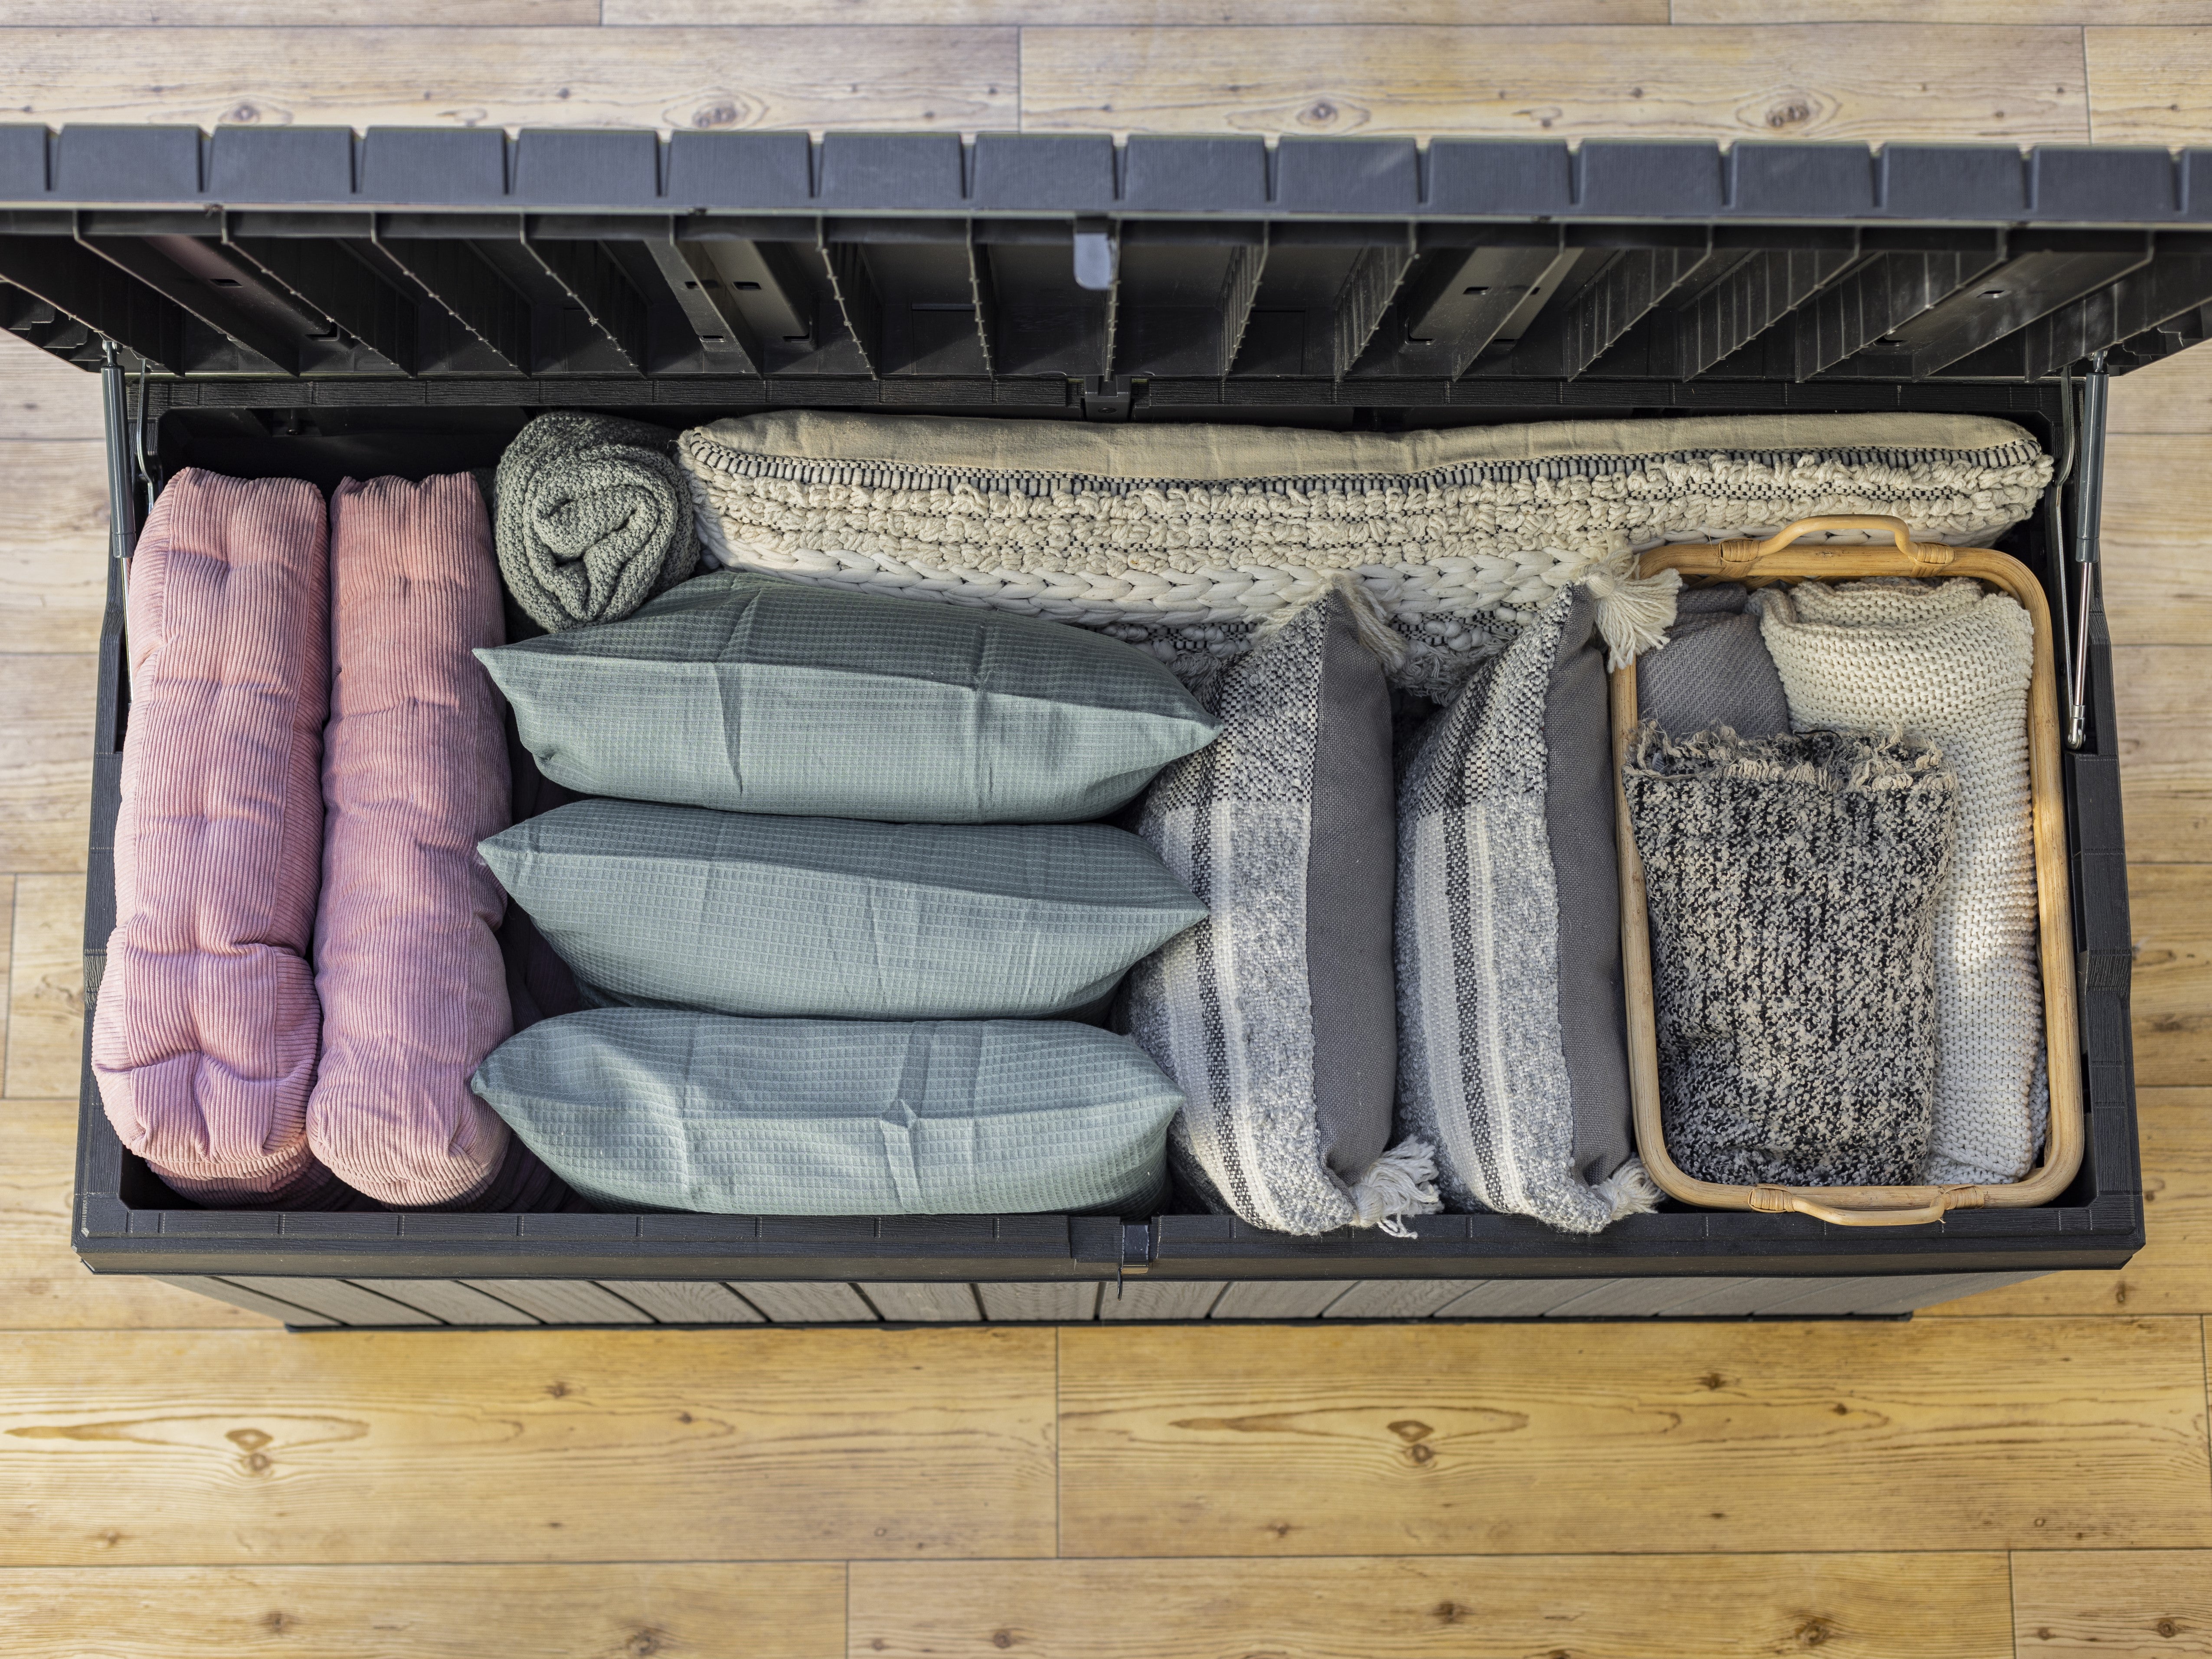 Storage box filled with cushions and blankets